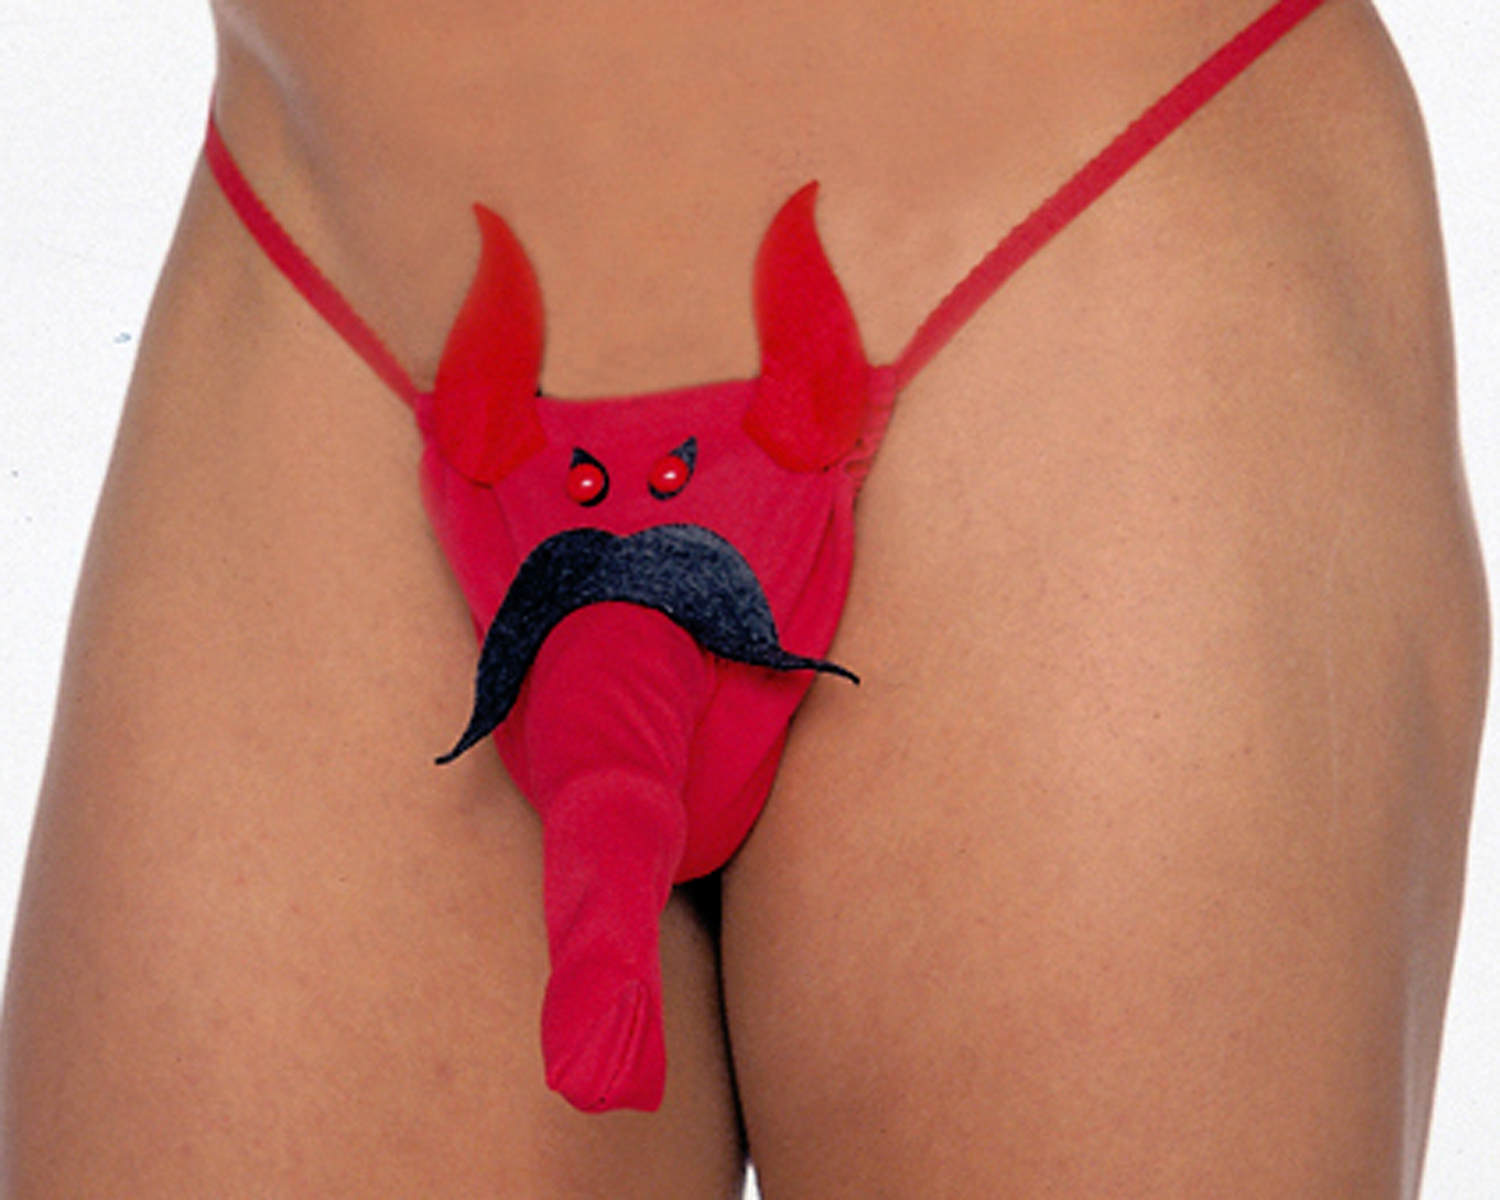 Red and black men's devil g-string pouch.